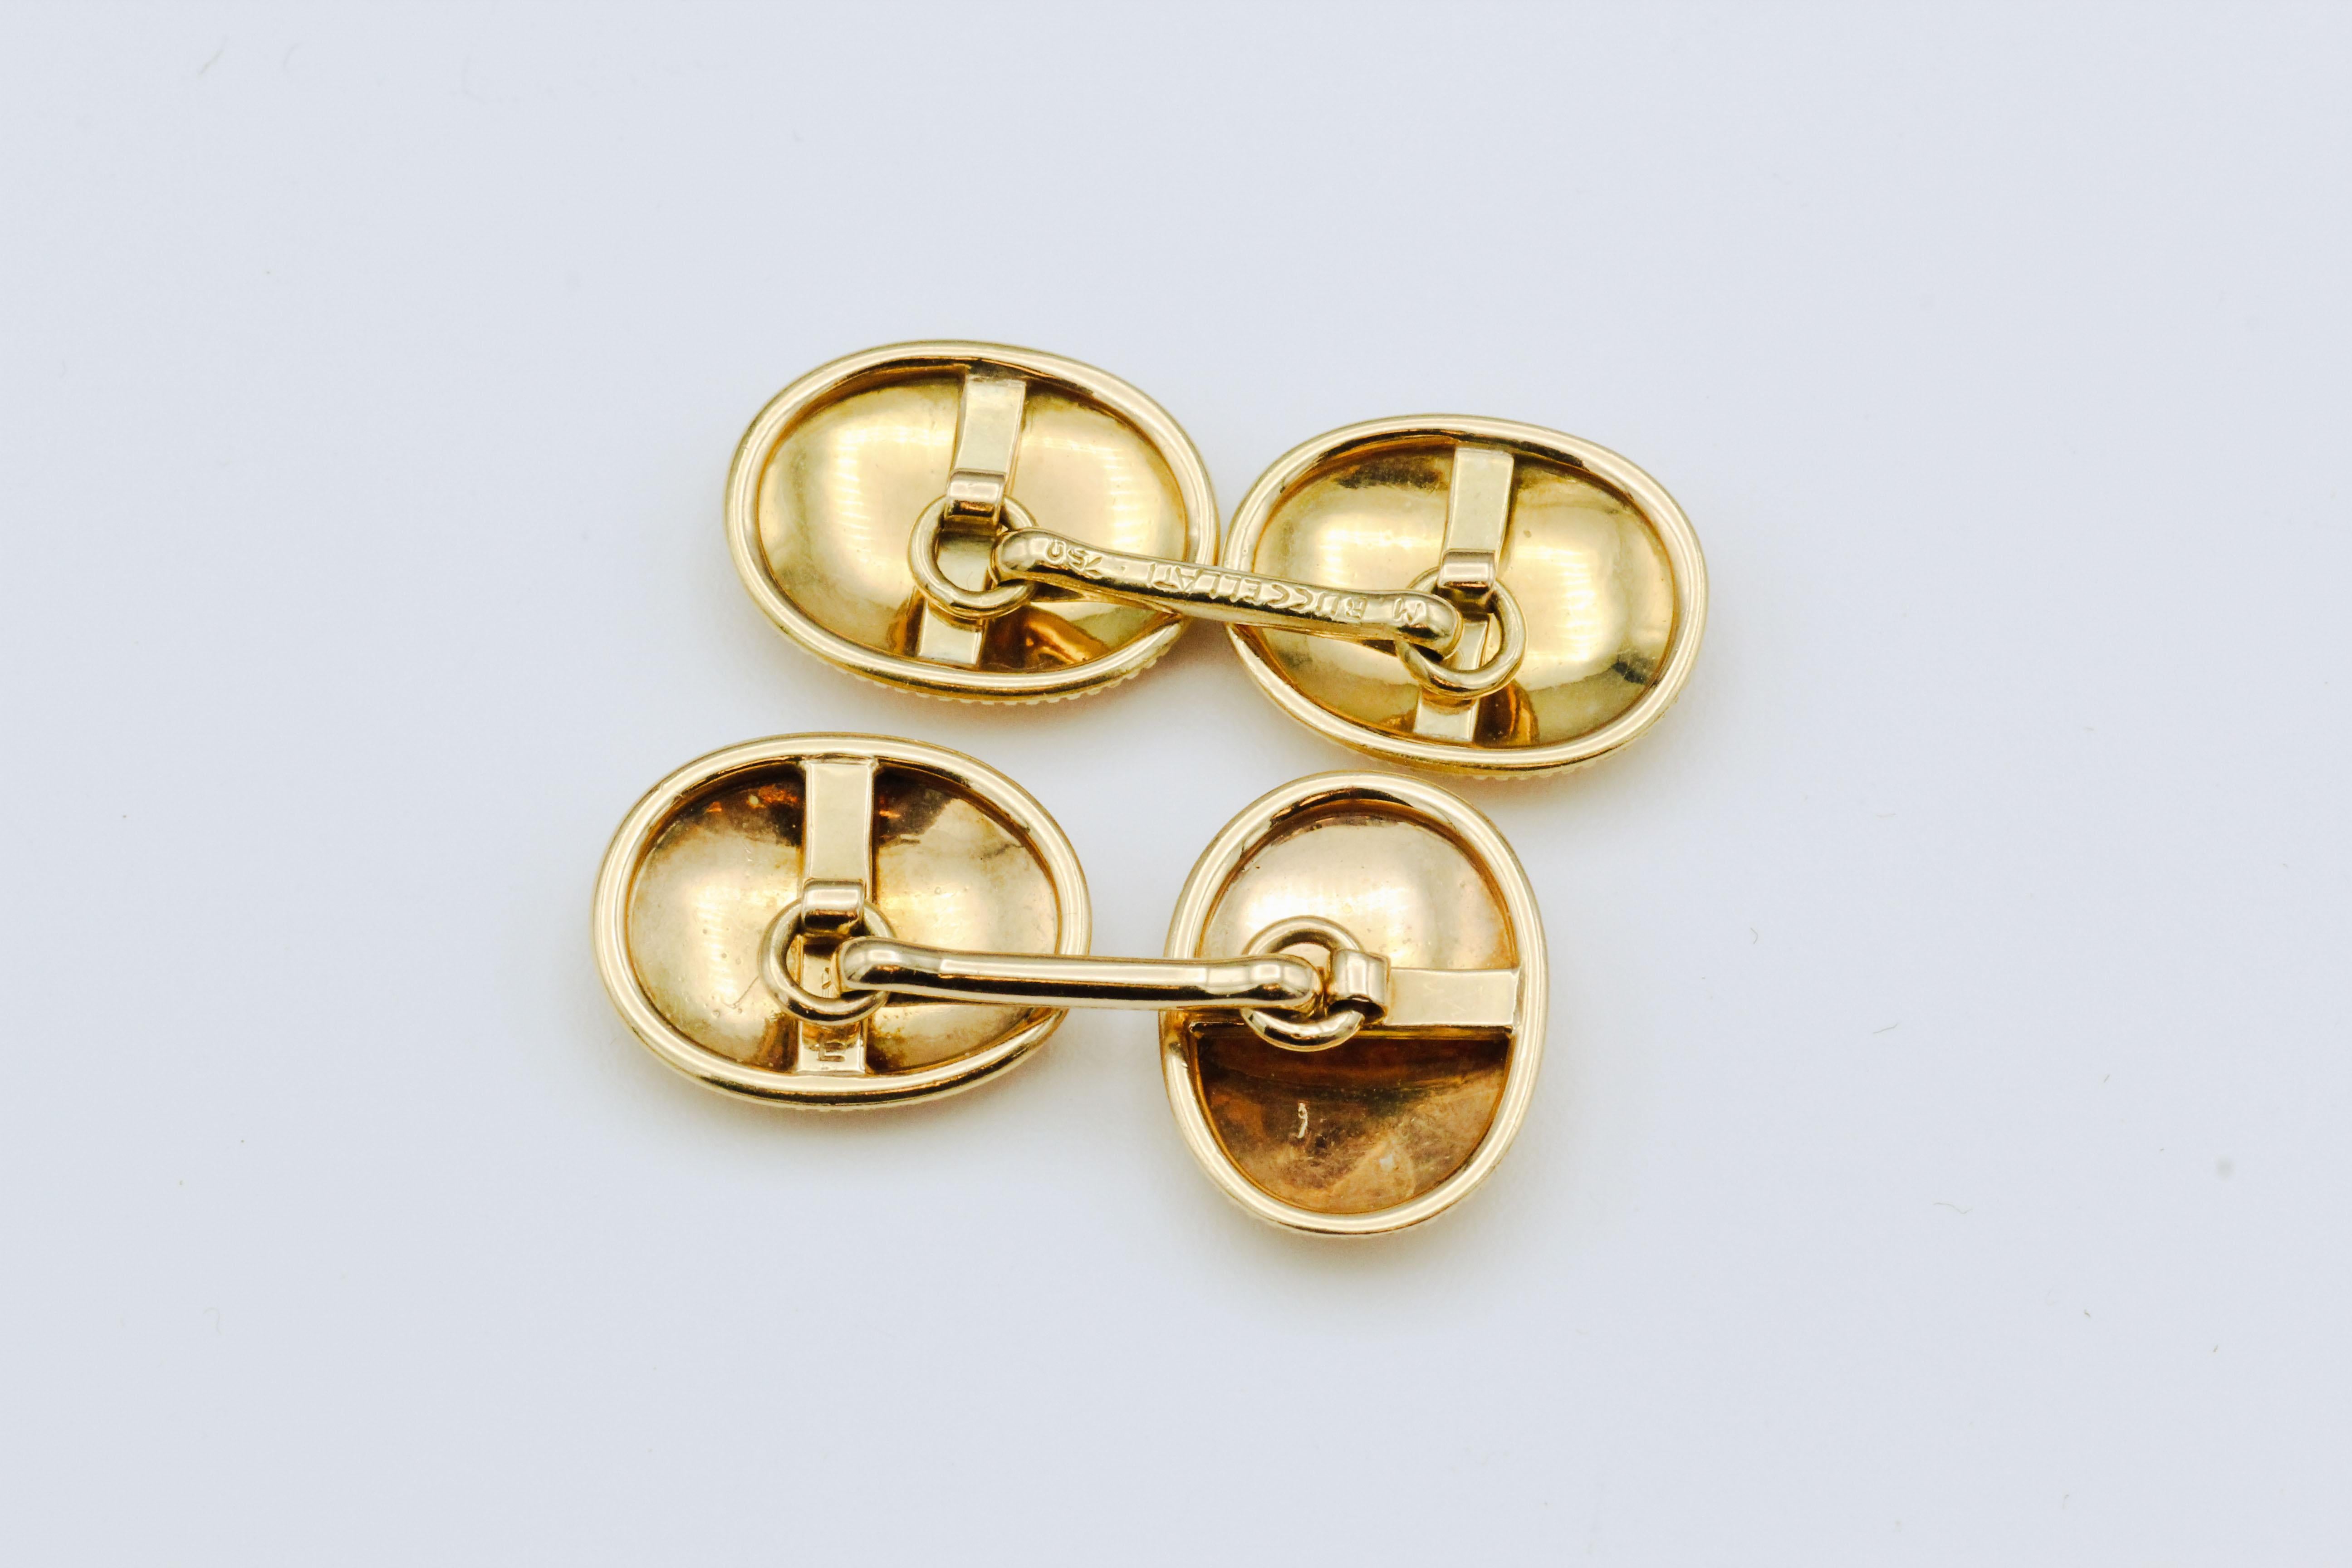 Fine pair of cufflinks in 18K yellow gold by Buccellati, circa 1960-70s. The cufflinks feature an oval shape with intricate hand etched workmanship, the gold is detailed in the trademark Buccellati Florentine satin-like finish. 

Hallmarks: M.